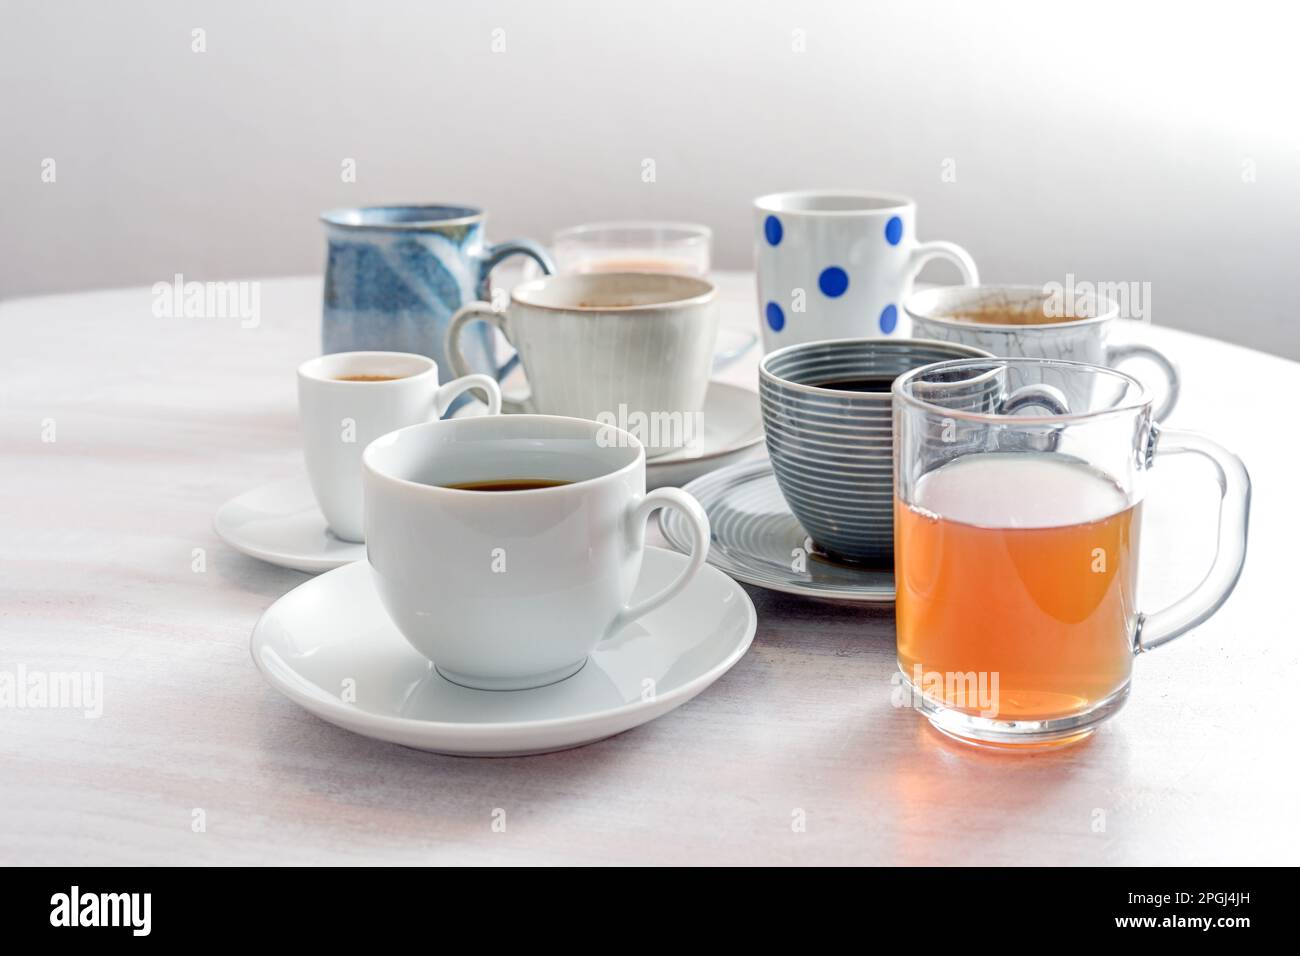 Tea and coffee cups in different styles on a white wooden table against a light gray wall, copy space, selected focus, narrow depth of field Stock Photo